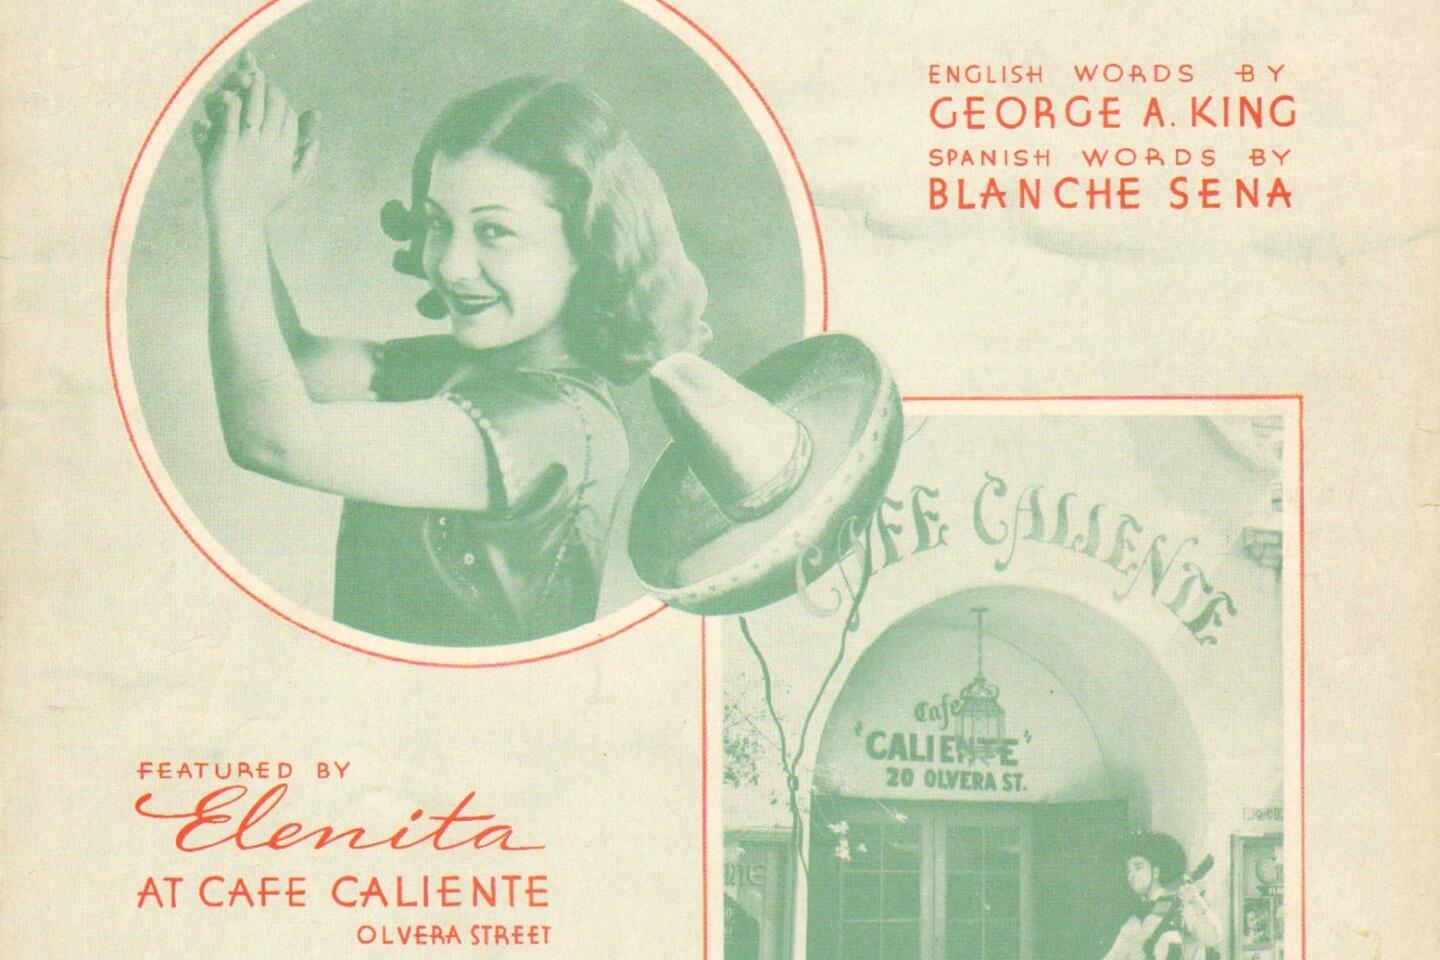 The cover for the 1938 sheet music "Chiapanecas," composed by George A. King. The sheet music is part of the 2013 book, "Songs in the Key of Los Angeles: Sheet Music From the Collection of the Los Angeles Public Library."